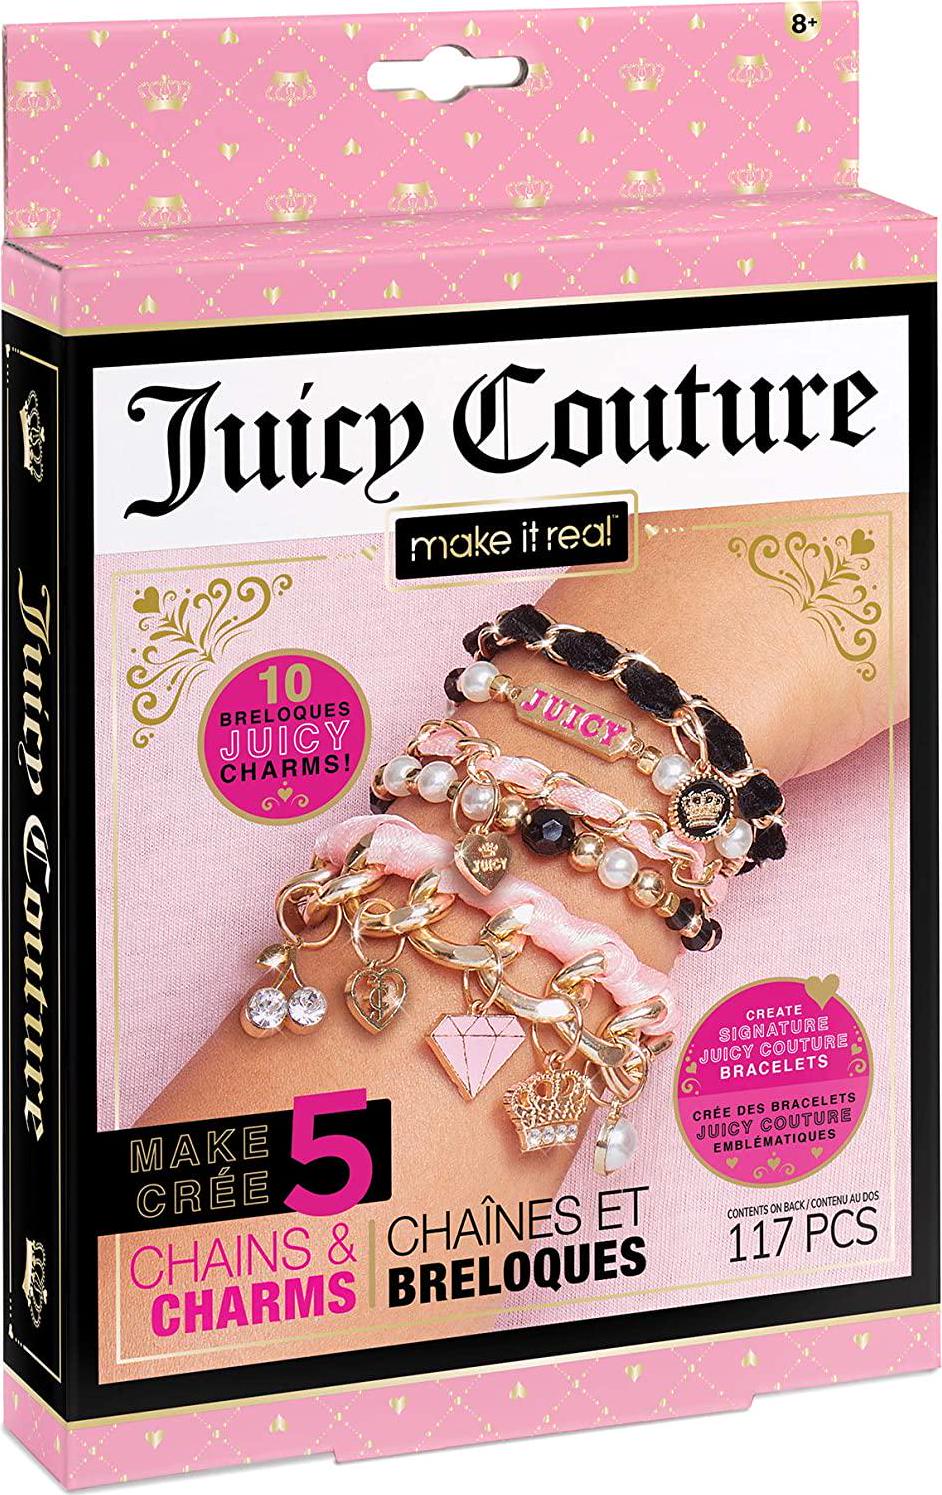 Make It Real, Make It Real - Juicy Couture Mini Chains and Charms - DIY Charm Bracelet Making Kit - Friendship Bracelet Kit with Charms, Beads and Cords - Arts and Crafts Bead Kit for Girls - Make 5 Bracelets